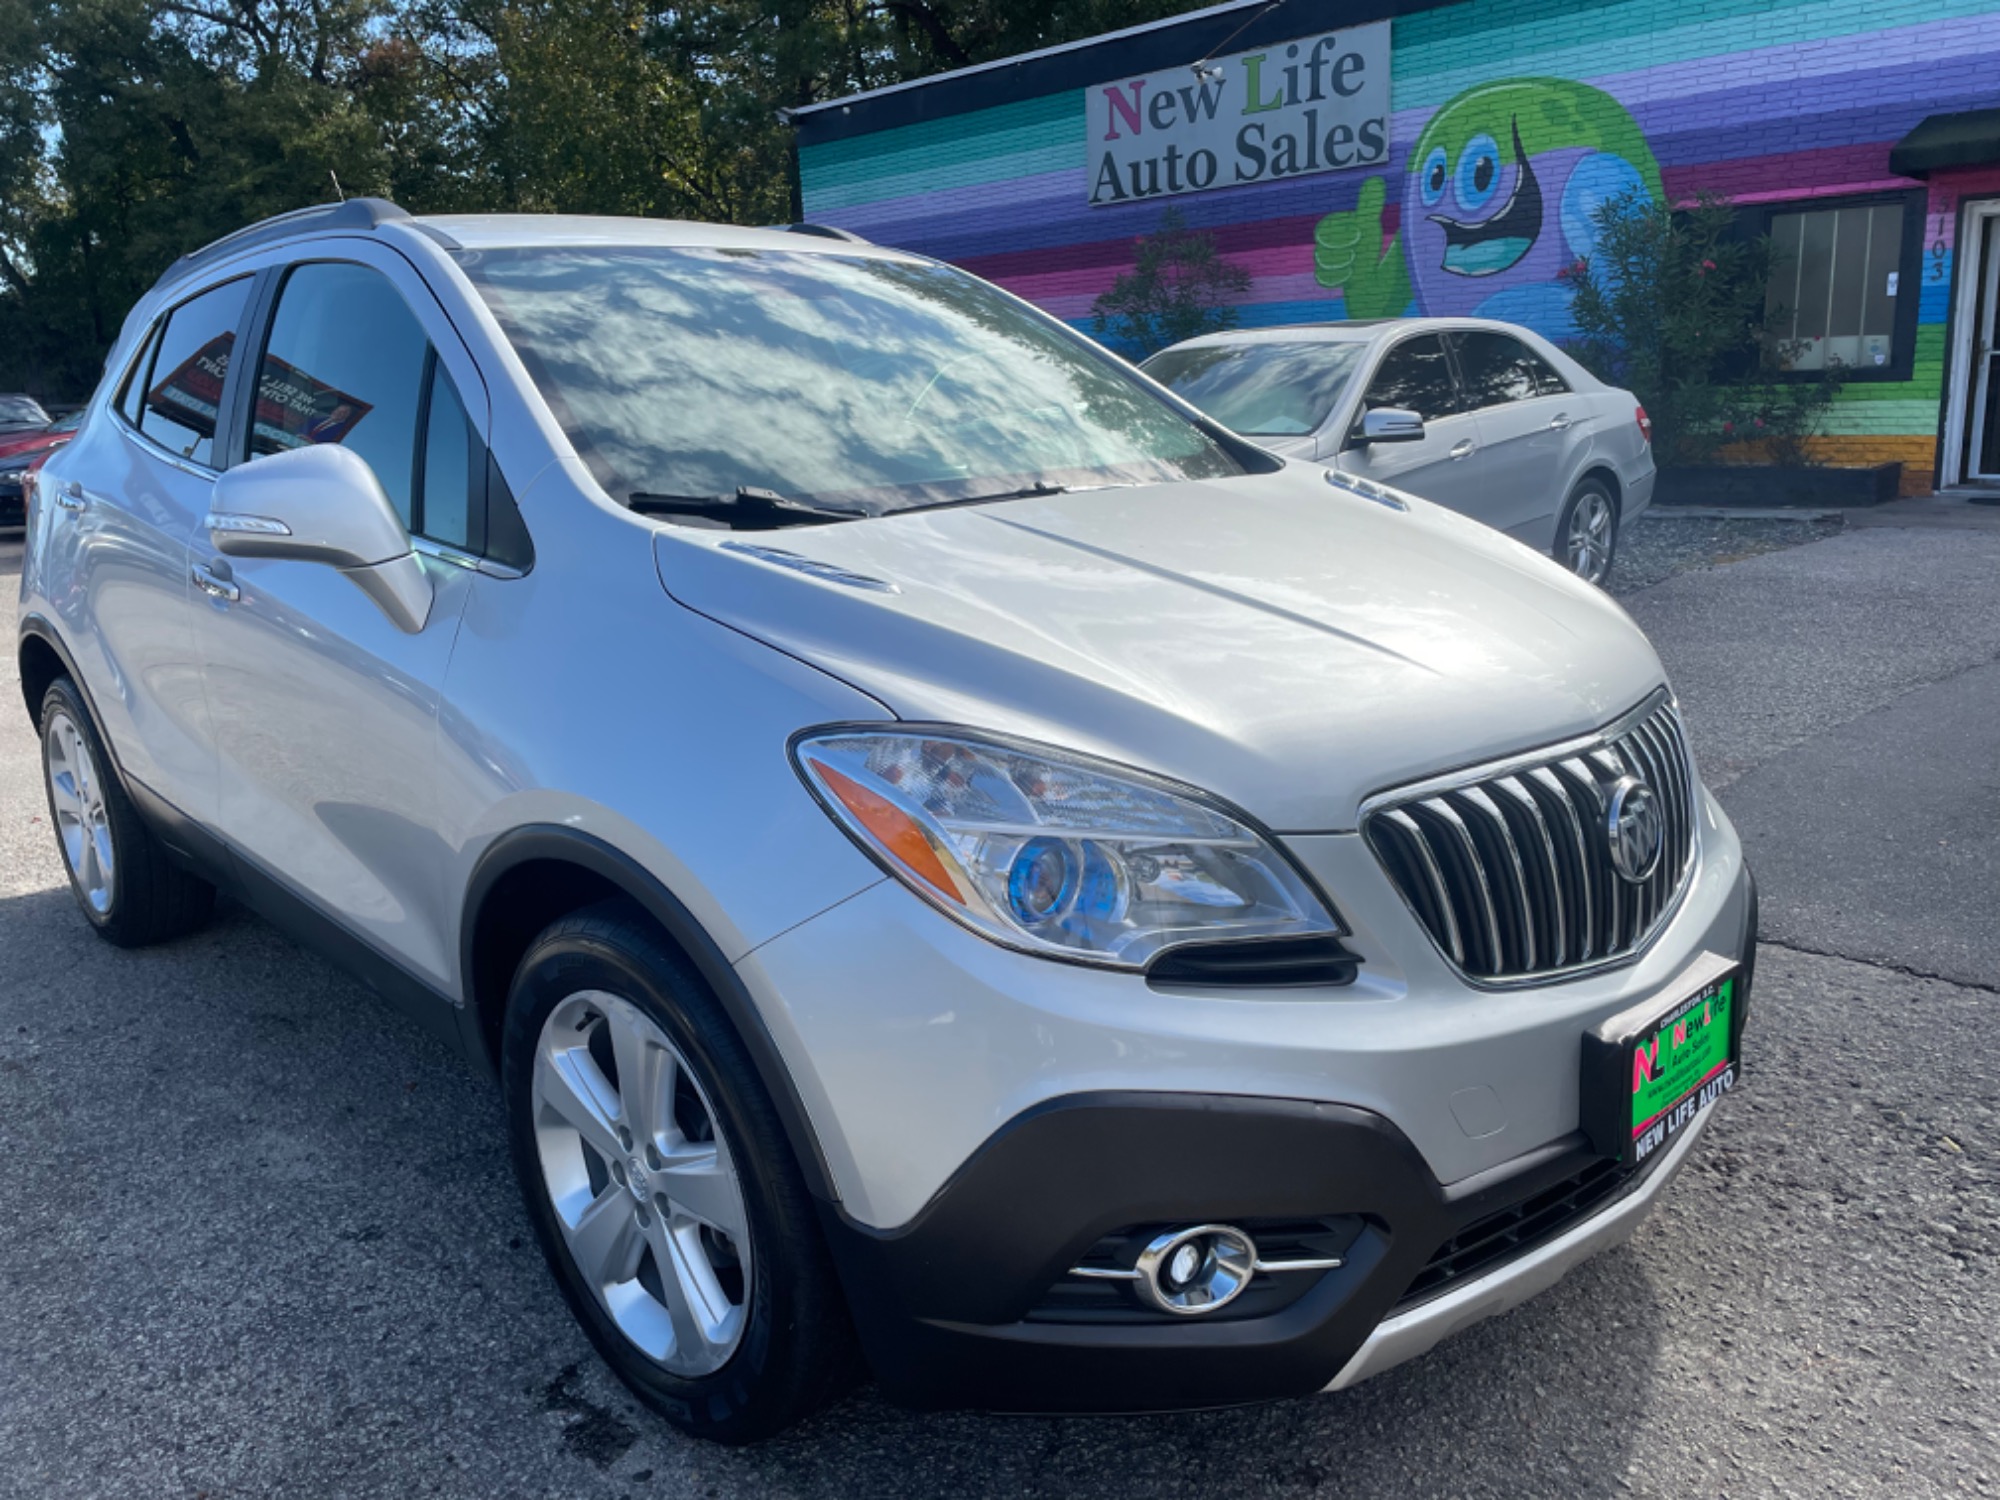 photo of 2015 BUICK ENCORE - Cute and Trendy Size! Super comfortable drive!